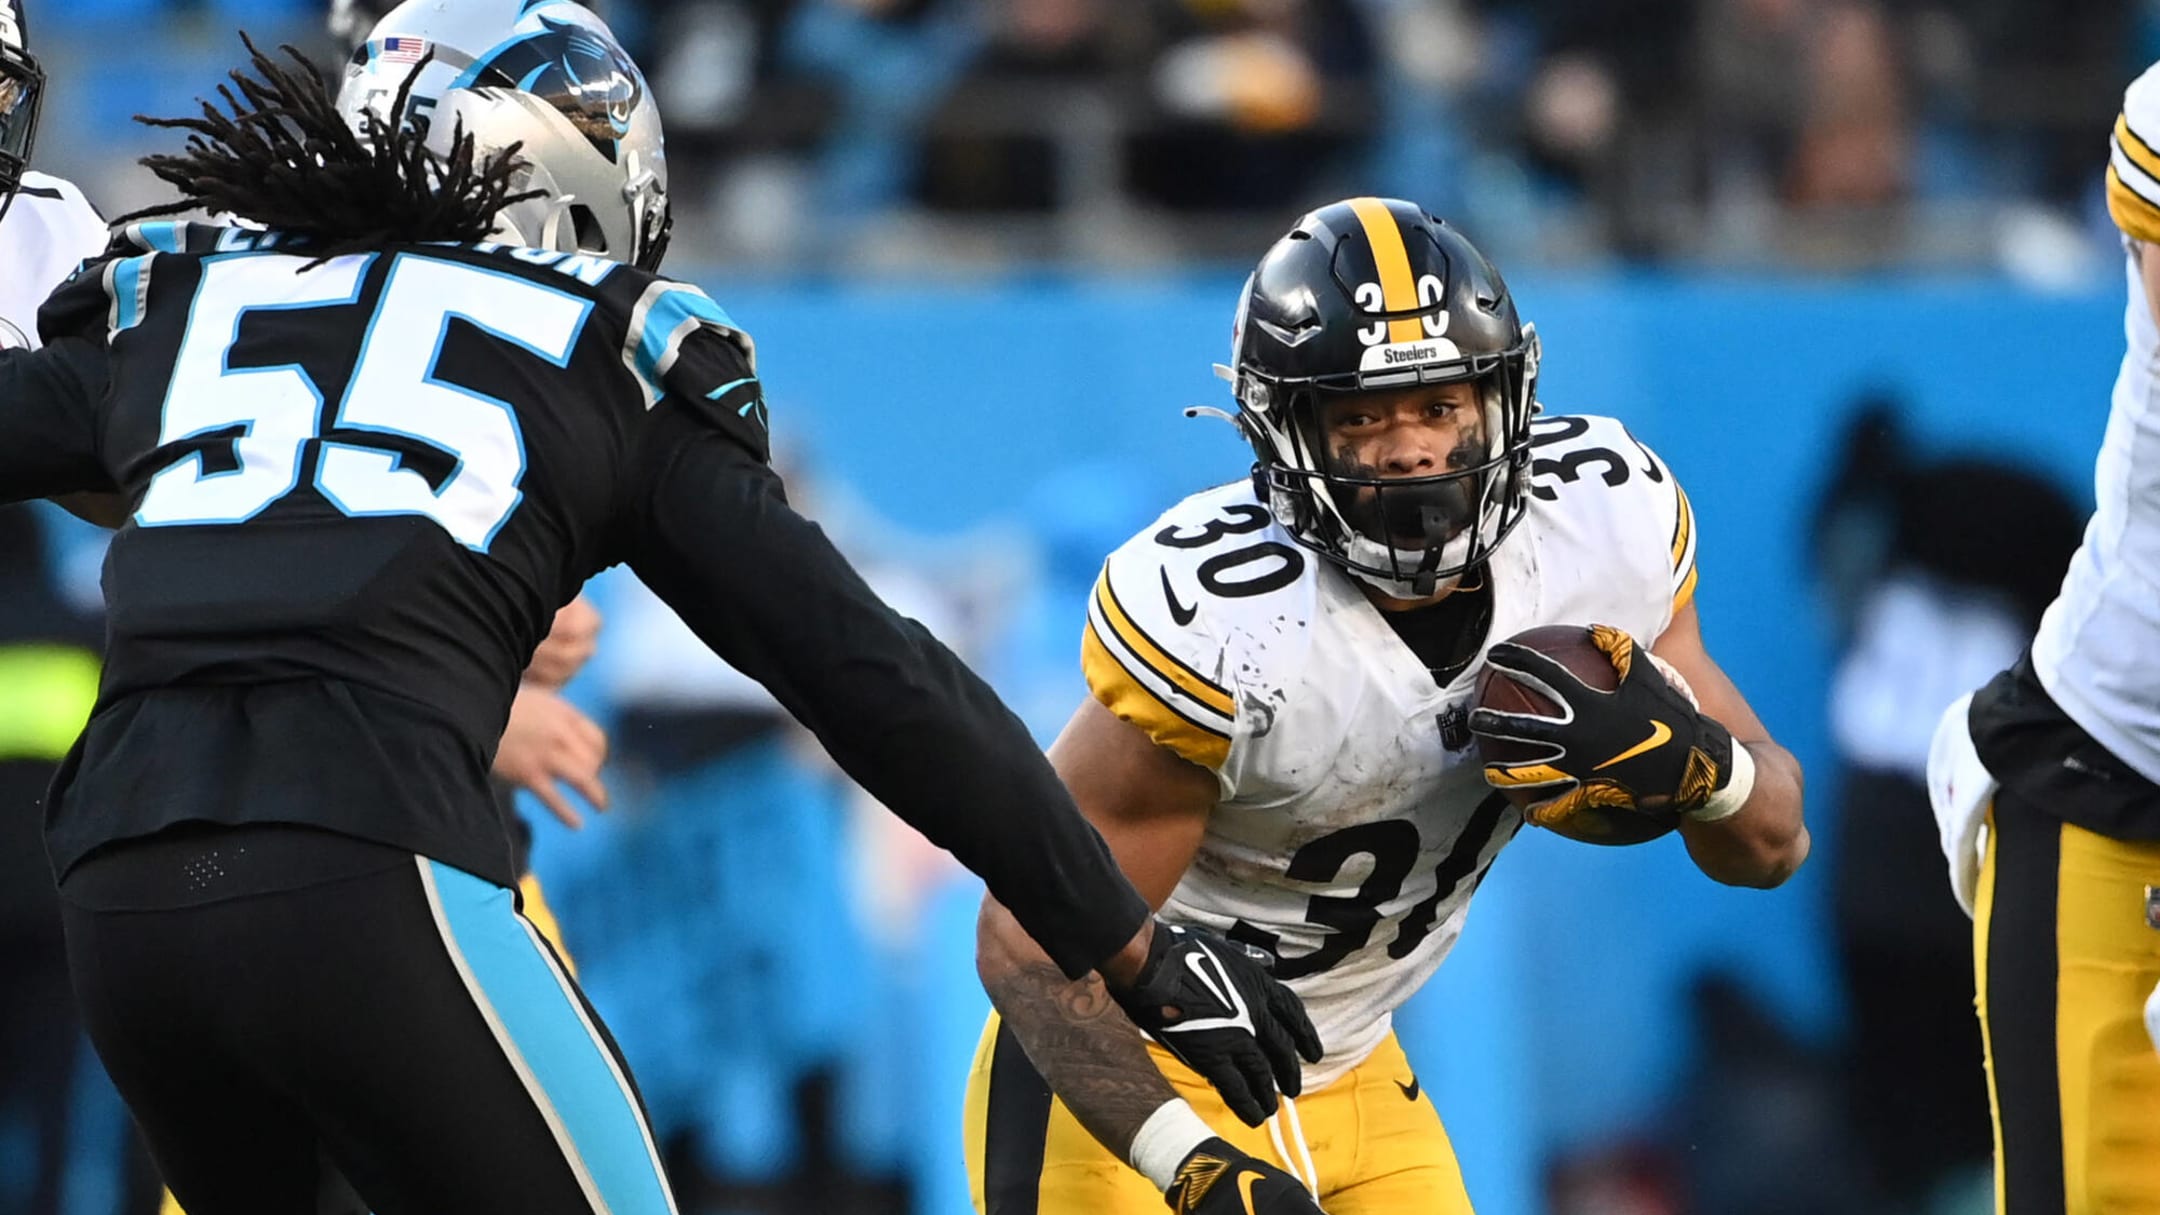 Steelers Playing On Christmas Eve And Other Holidays Bodes Well Ahead Of  Exciting 2022 Game